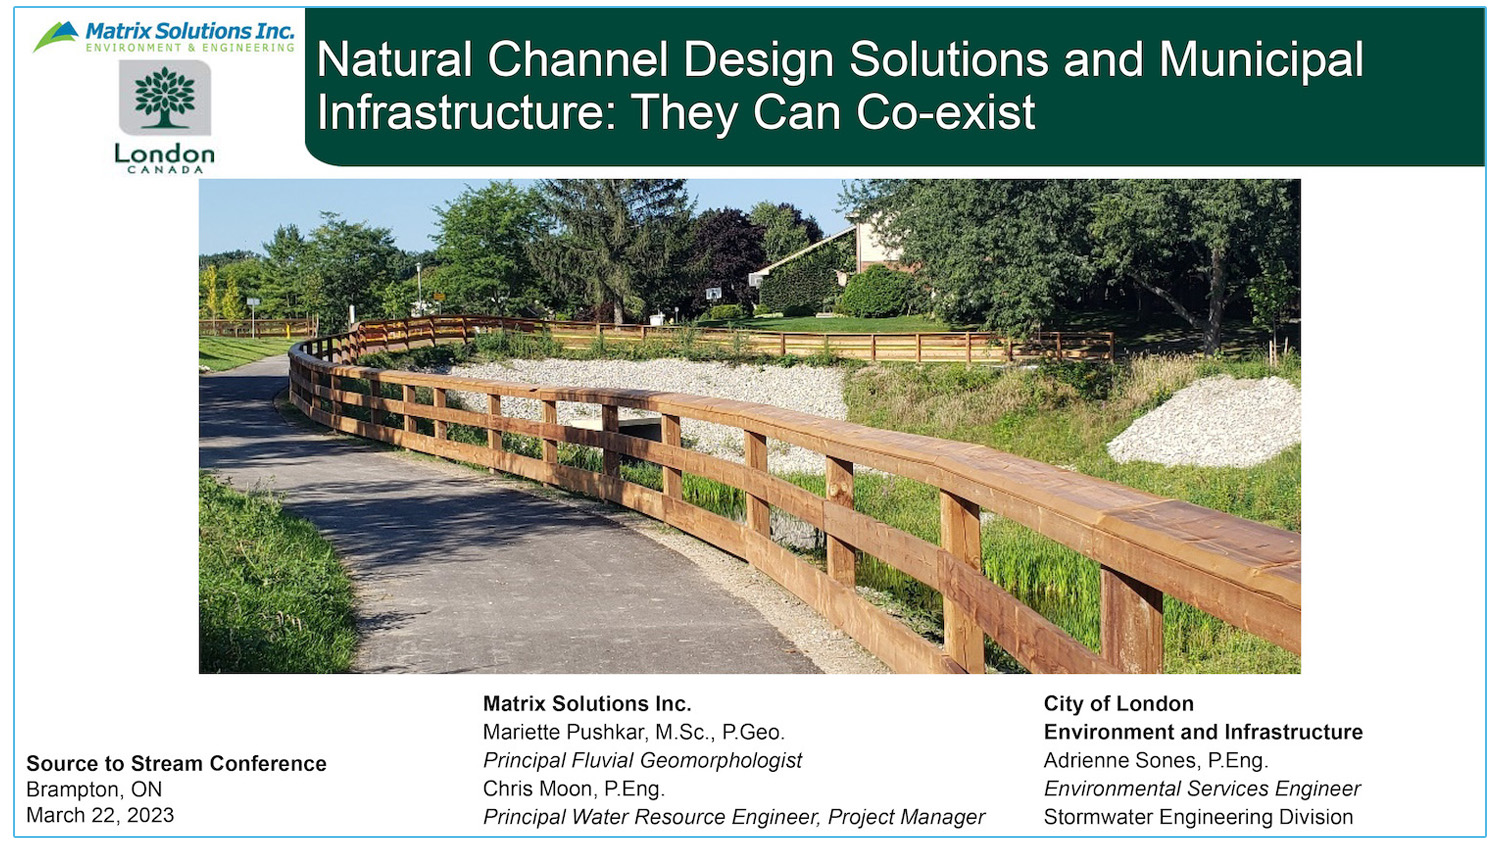 Natural Channel Design Solutions and Municipal Infrastructure - They Can Co-exist - Presenters - Mariëtte Pushkar - Matrix Solutions - Adrienne Sones - City of London